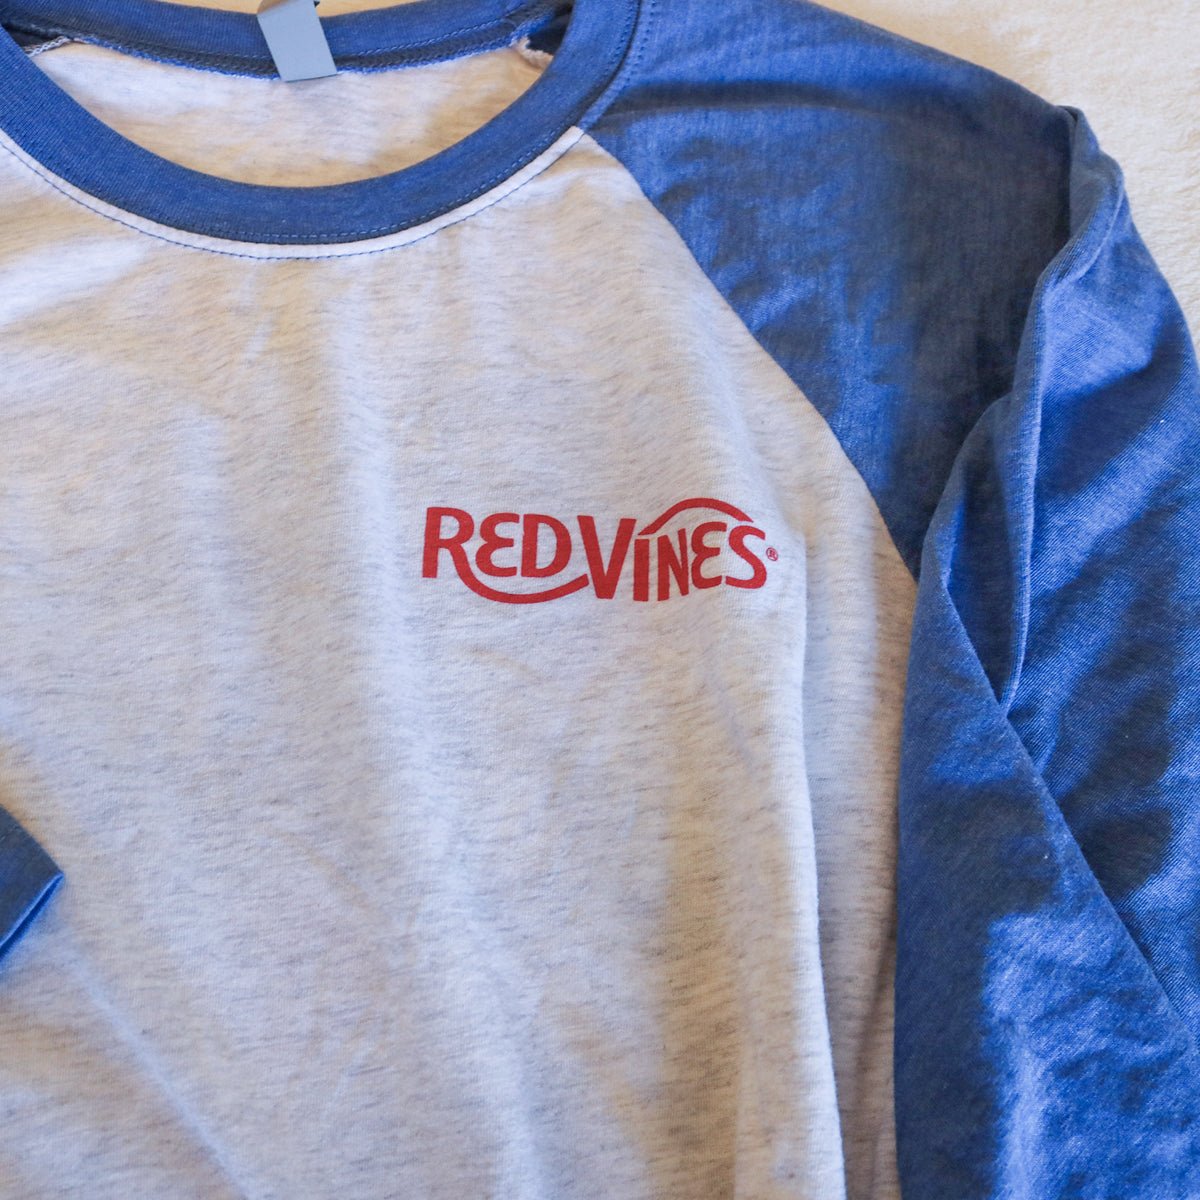 RED VINES Peace, Love & Vines T-Shirt close up of front logo